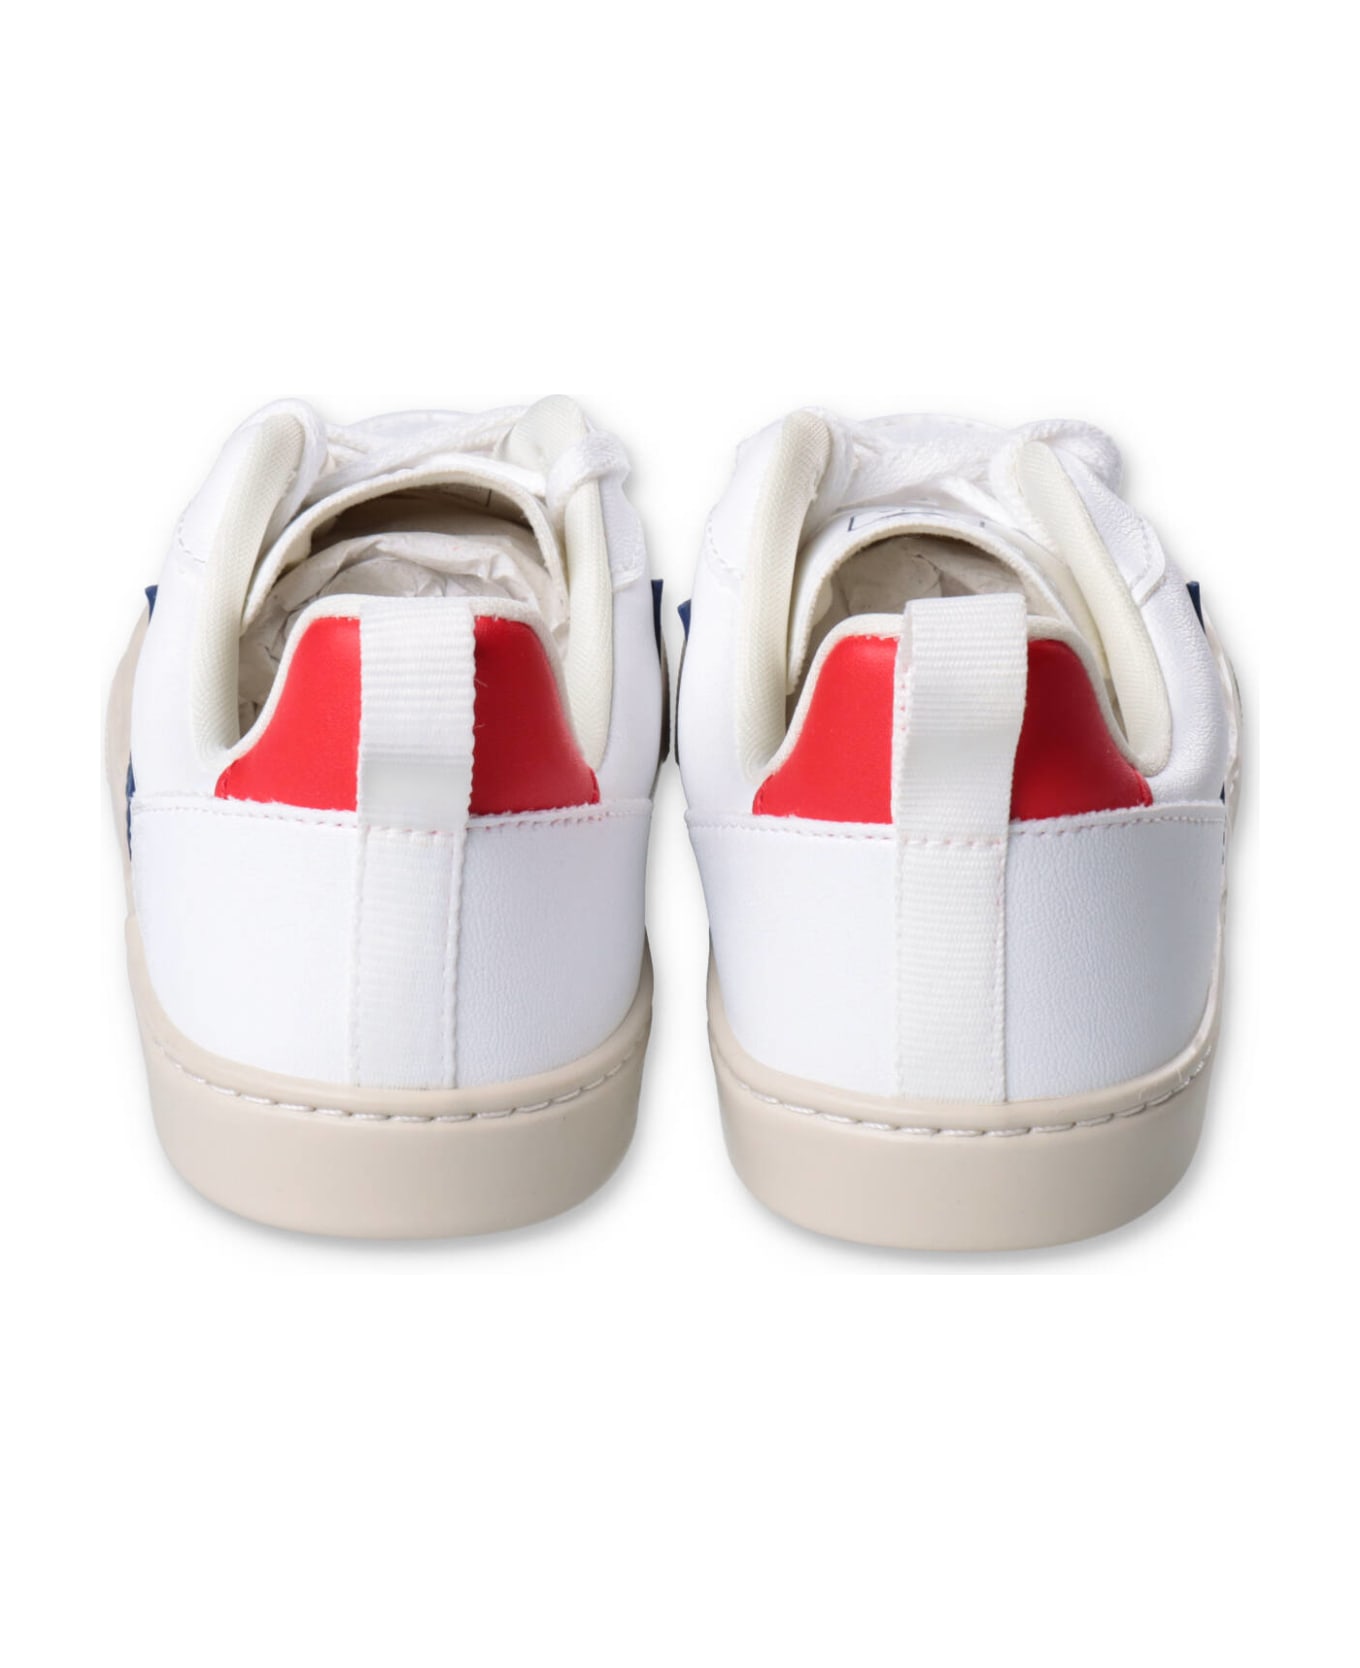 Veja Sneakers Bianche In Similpelle Con Lacci Bambino - Bianco